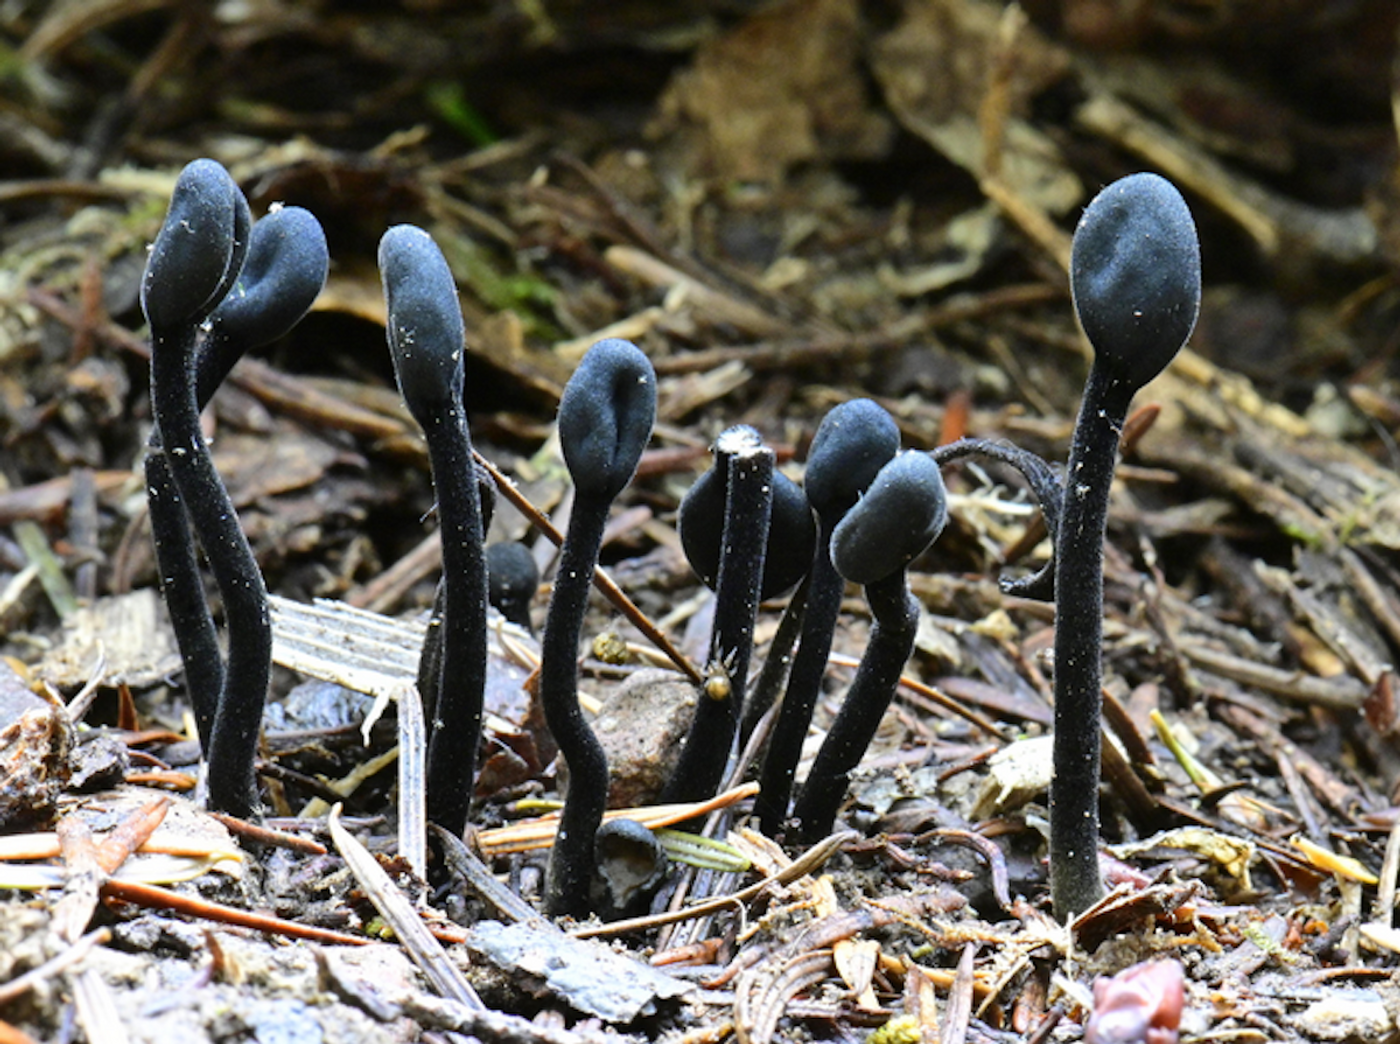 The members of this exotic new group of fungi, including these odd "earth tongues" were found to all descend from a common ancestor / (Photo: Alan Rockefeller, CC-BY-SA-4.0)